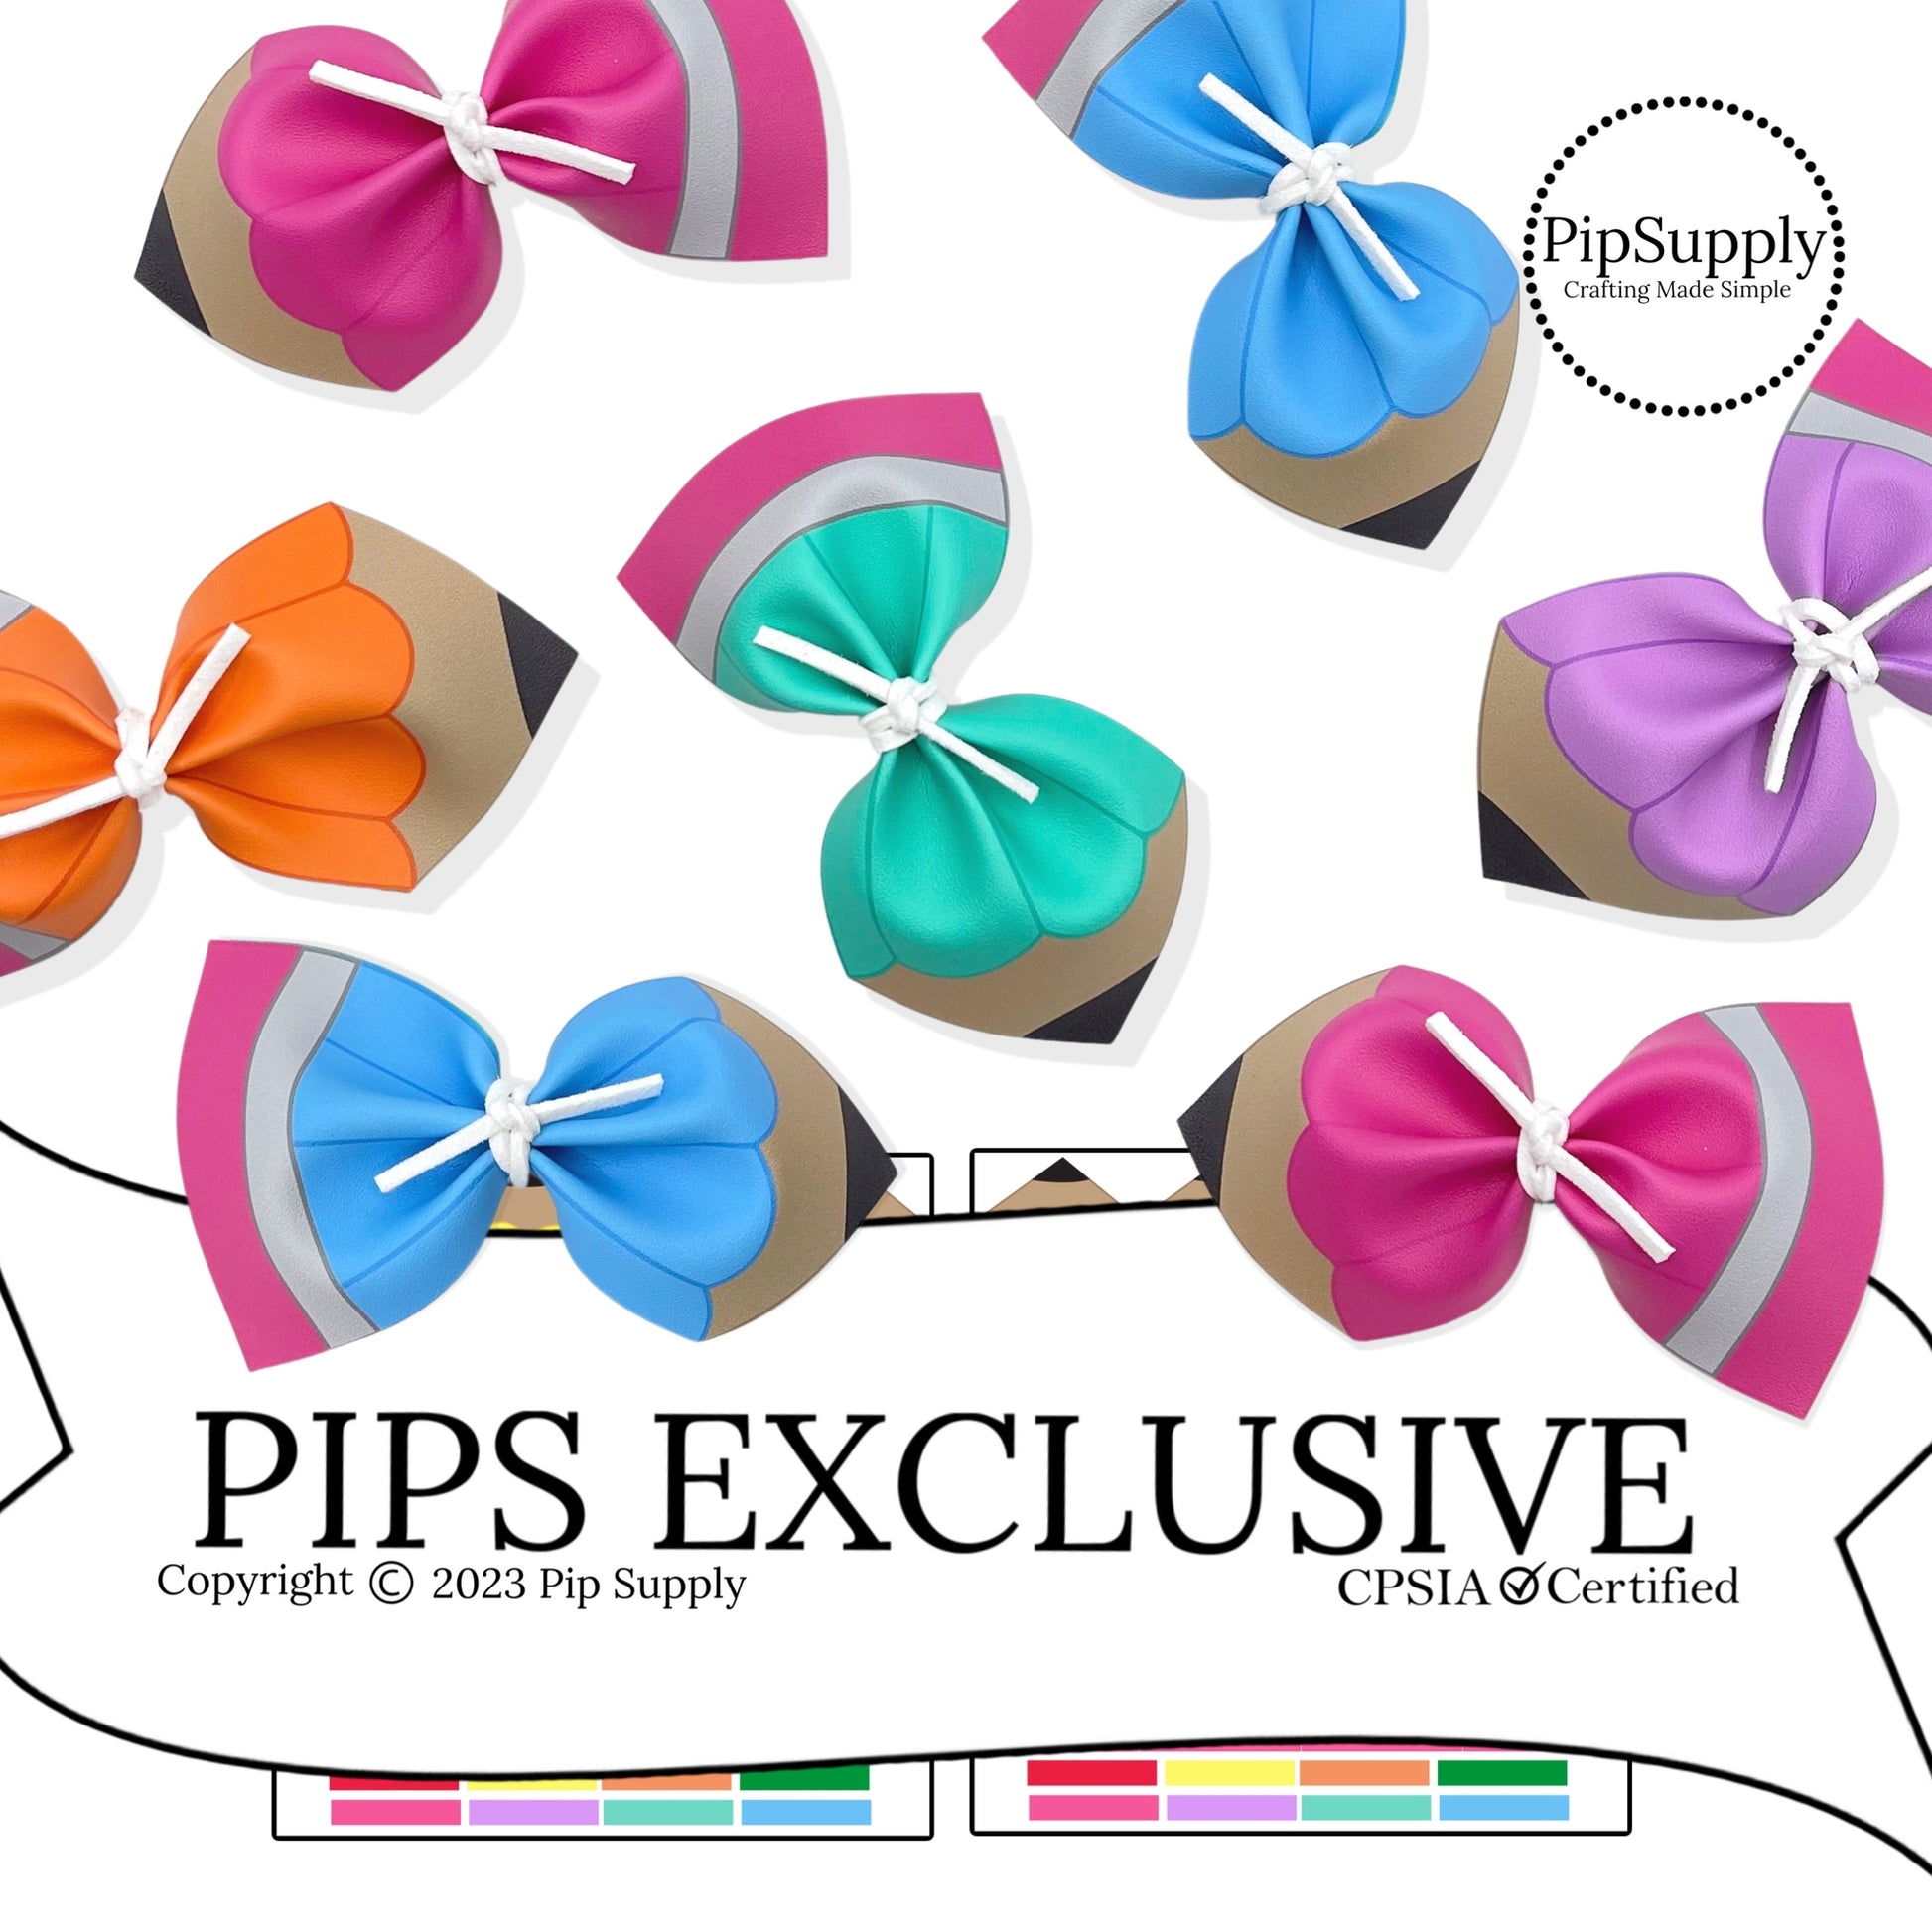 bright and pastel school pencil shapes on faux leather for diy hair bows or crafting